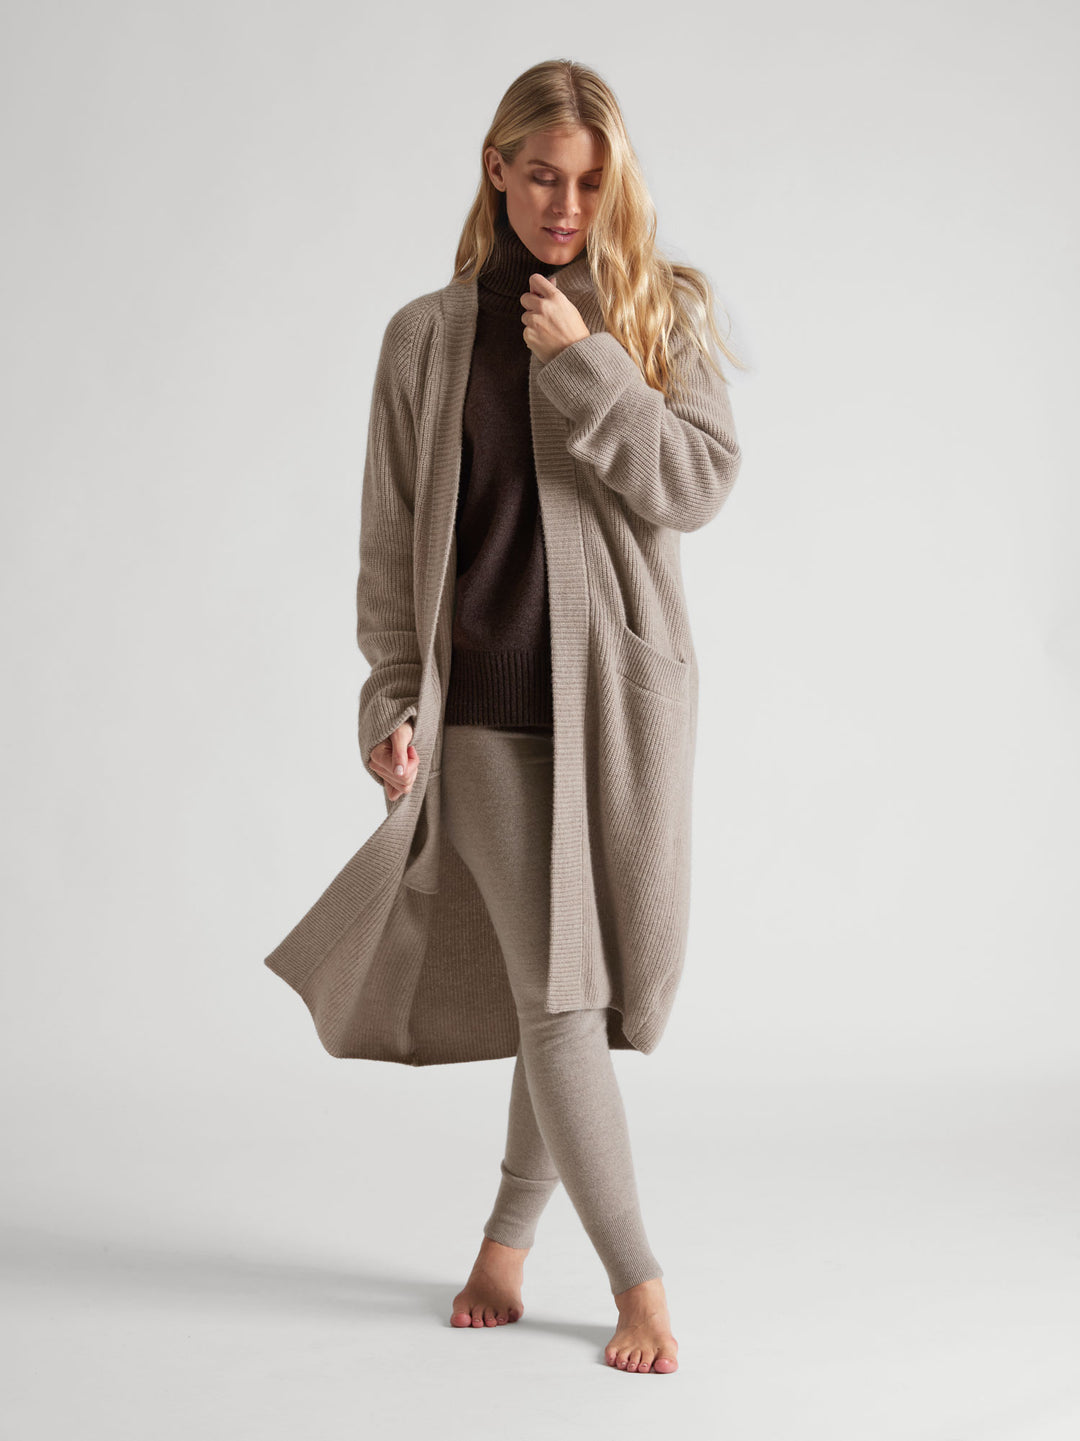 Rib knitted cashmere cardigan "Olea", in 100% pure cashmere. Color: Toast. Scandinavian design by Kashmina.